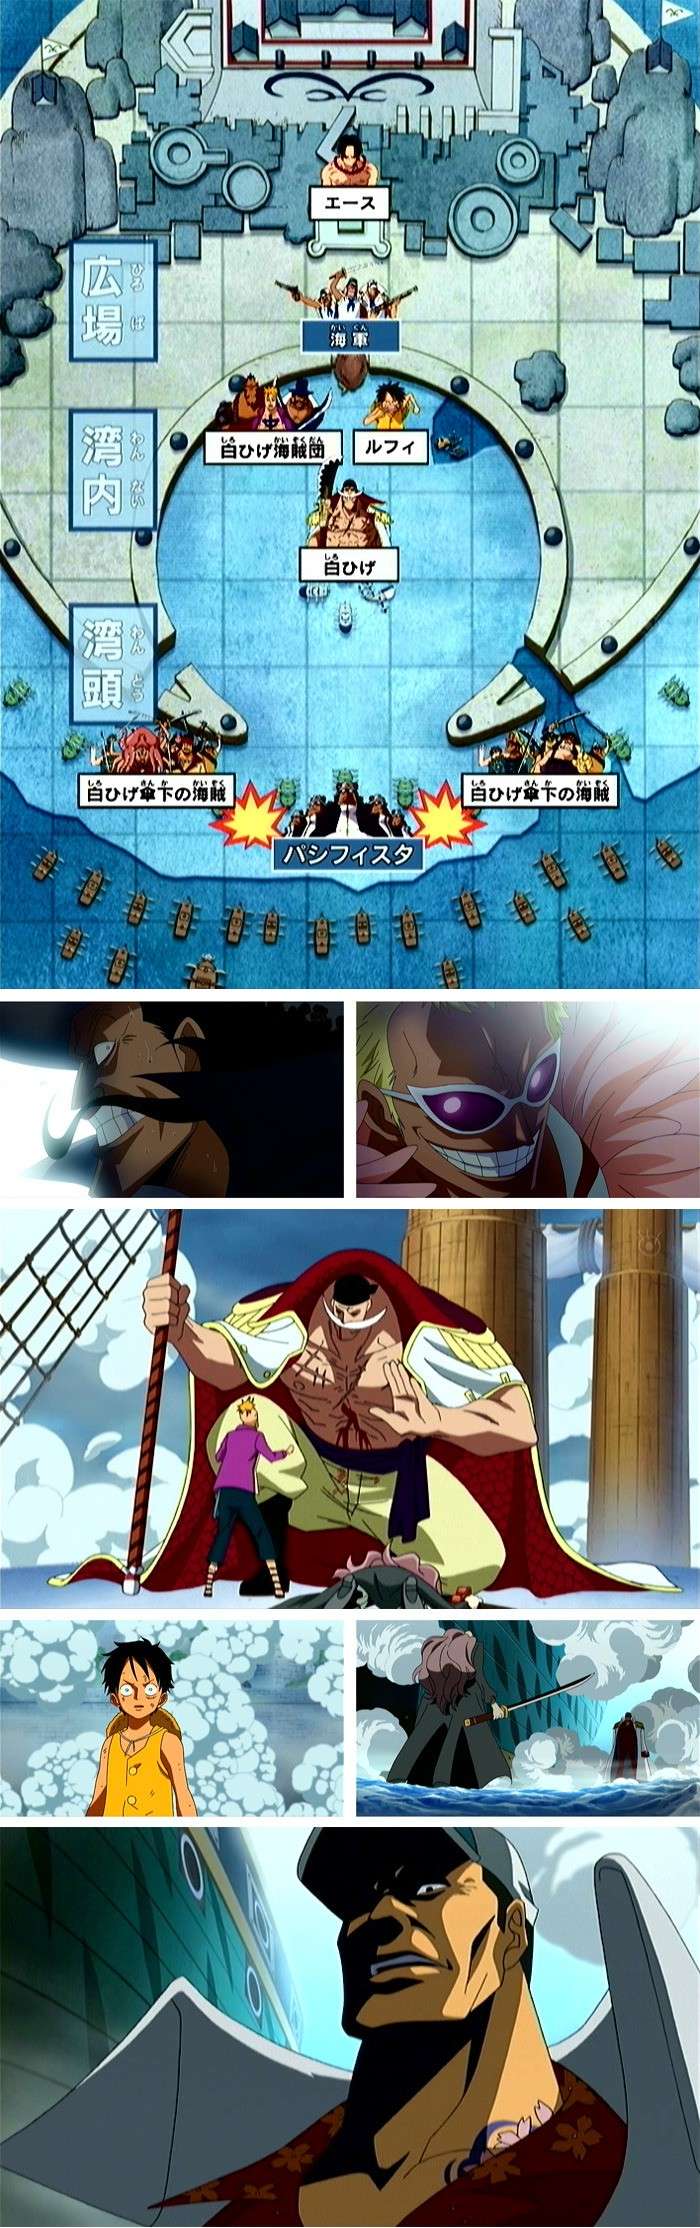 one piece annime - Page 4 Op-47210